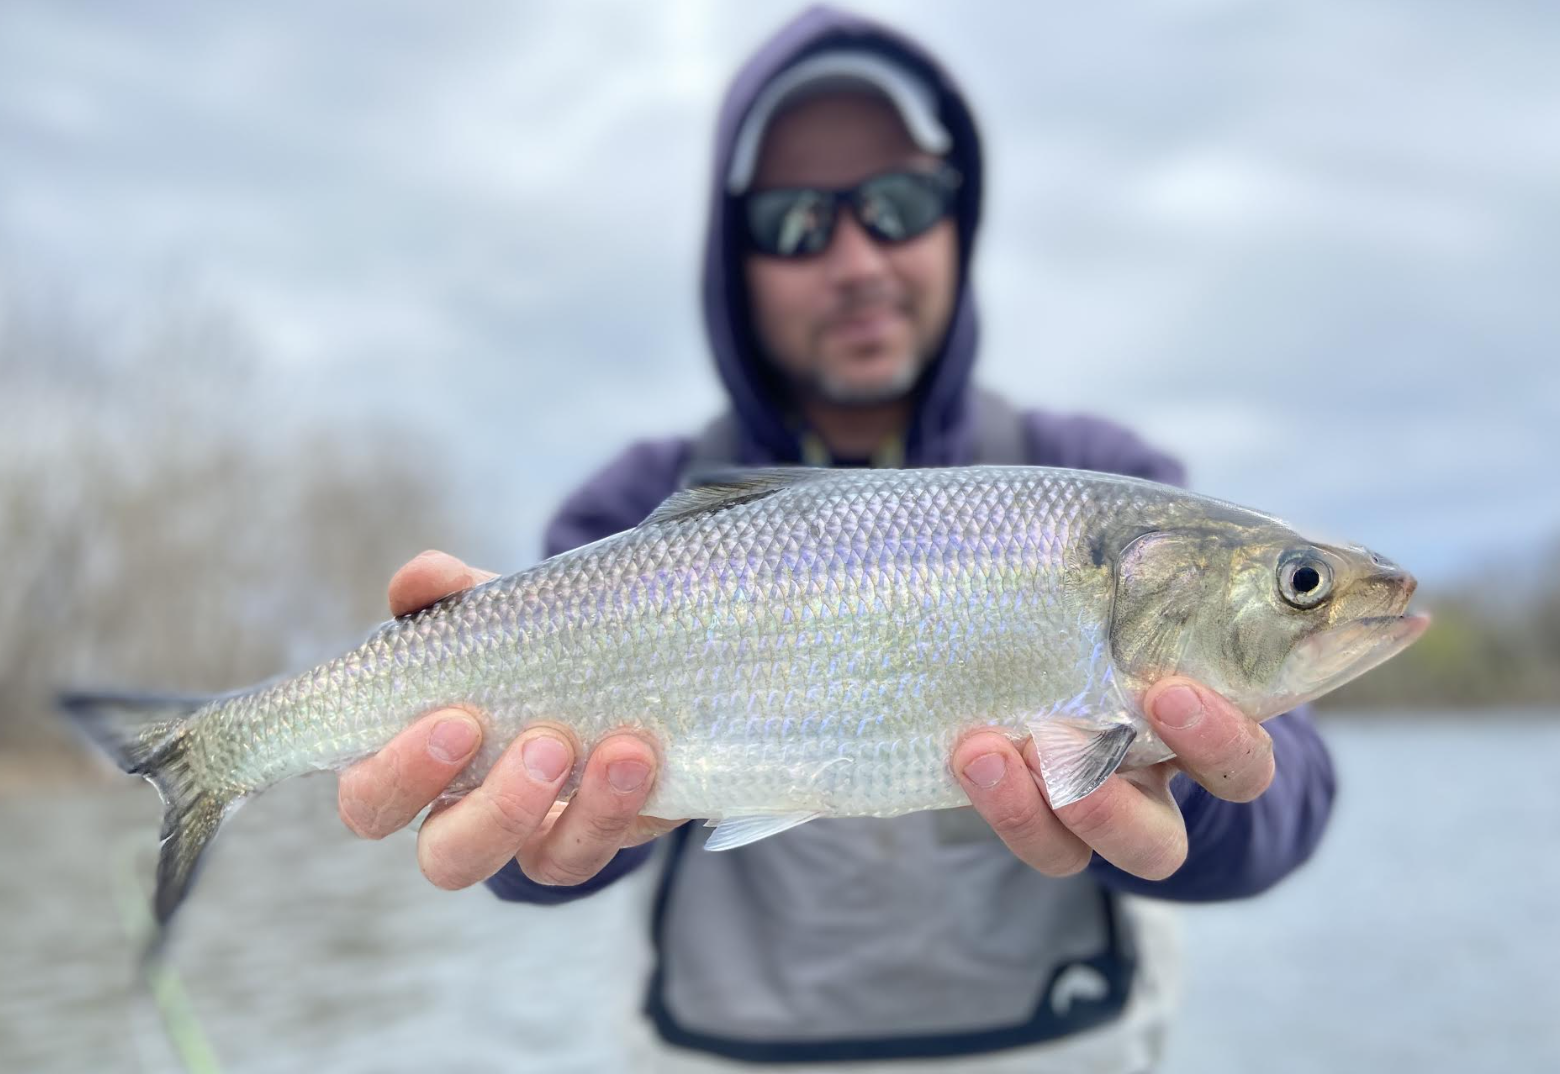 How to Catch Shad, a Beginner's Guide